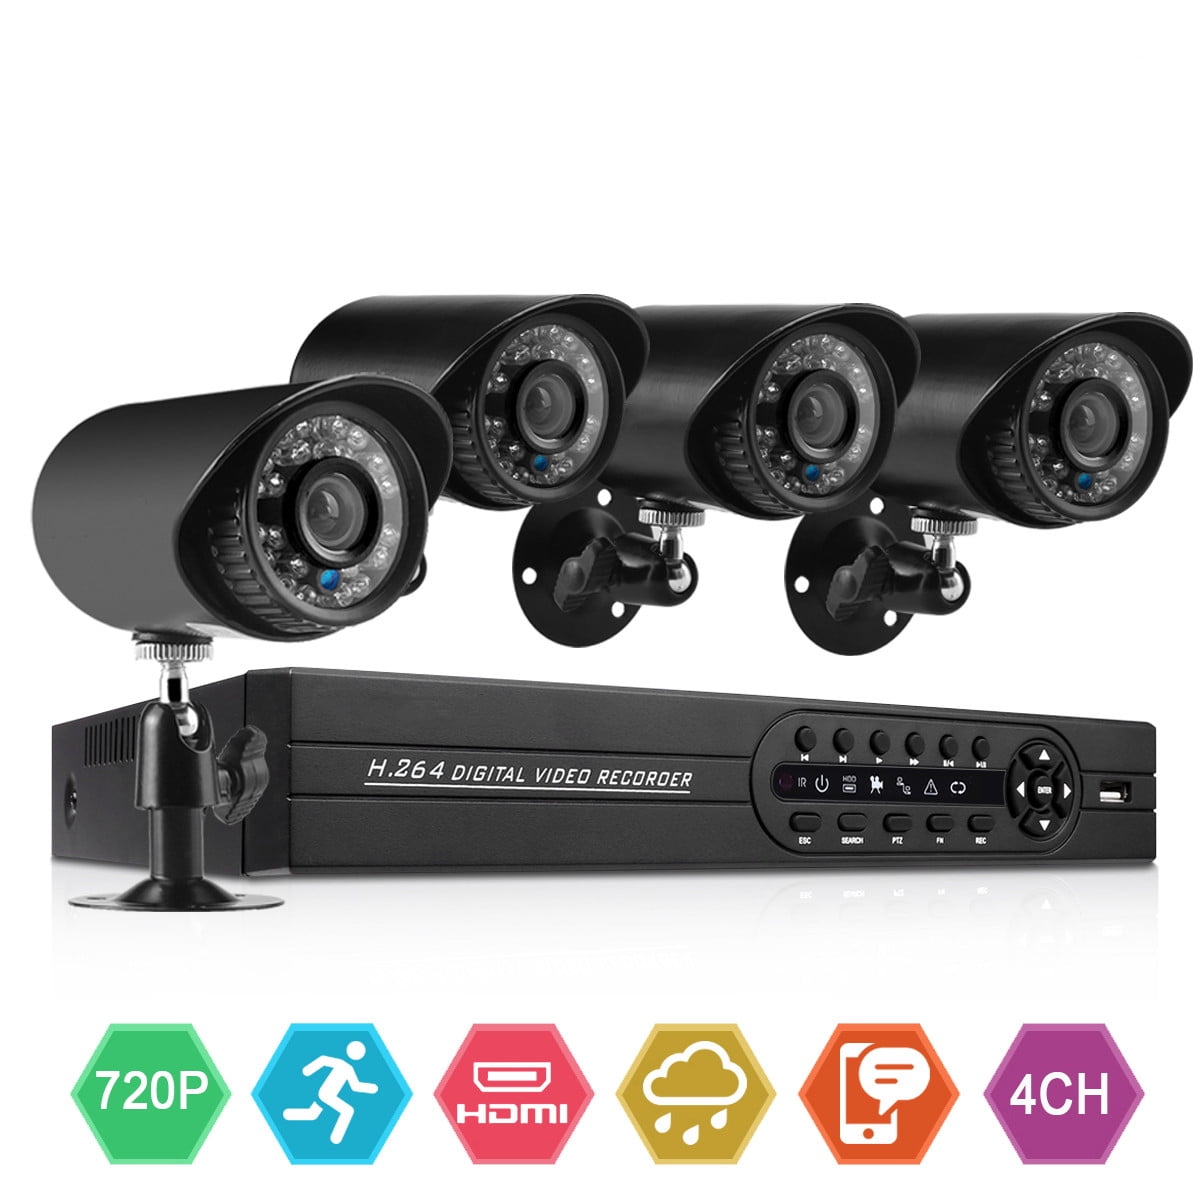 CASPERi 1080P 4CH NVR CCTV Outdoor Bullet Camera Home Security System with HDD 